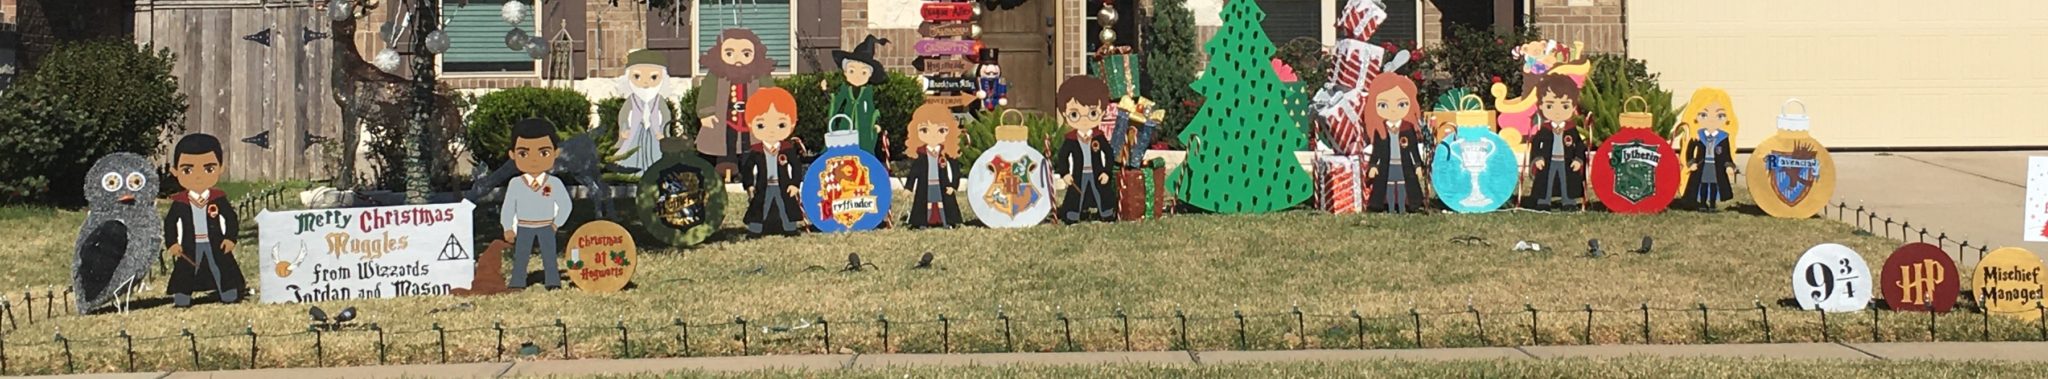 Harry Potter Christmas Yard Signs